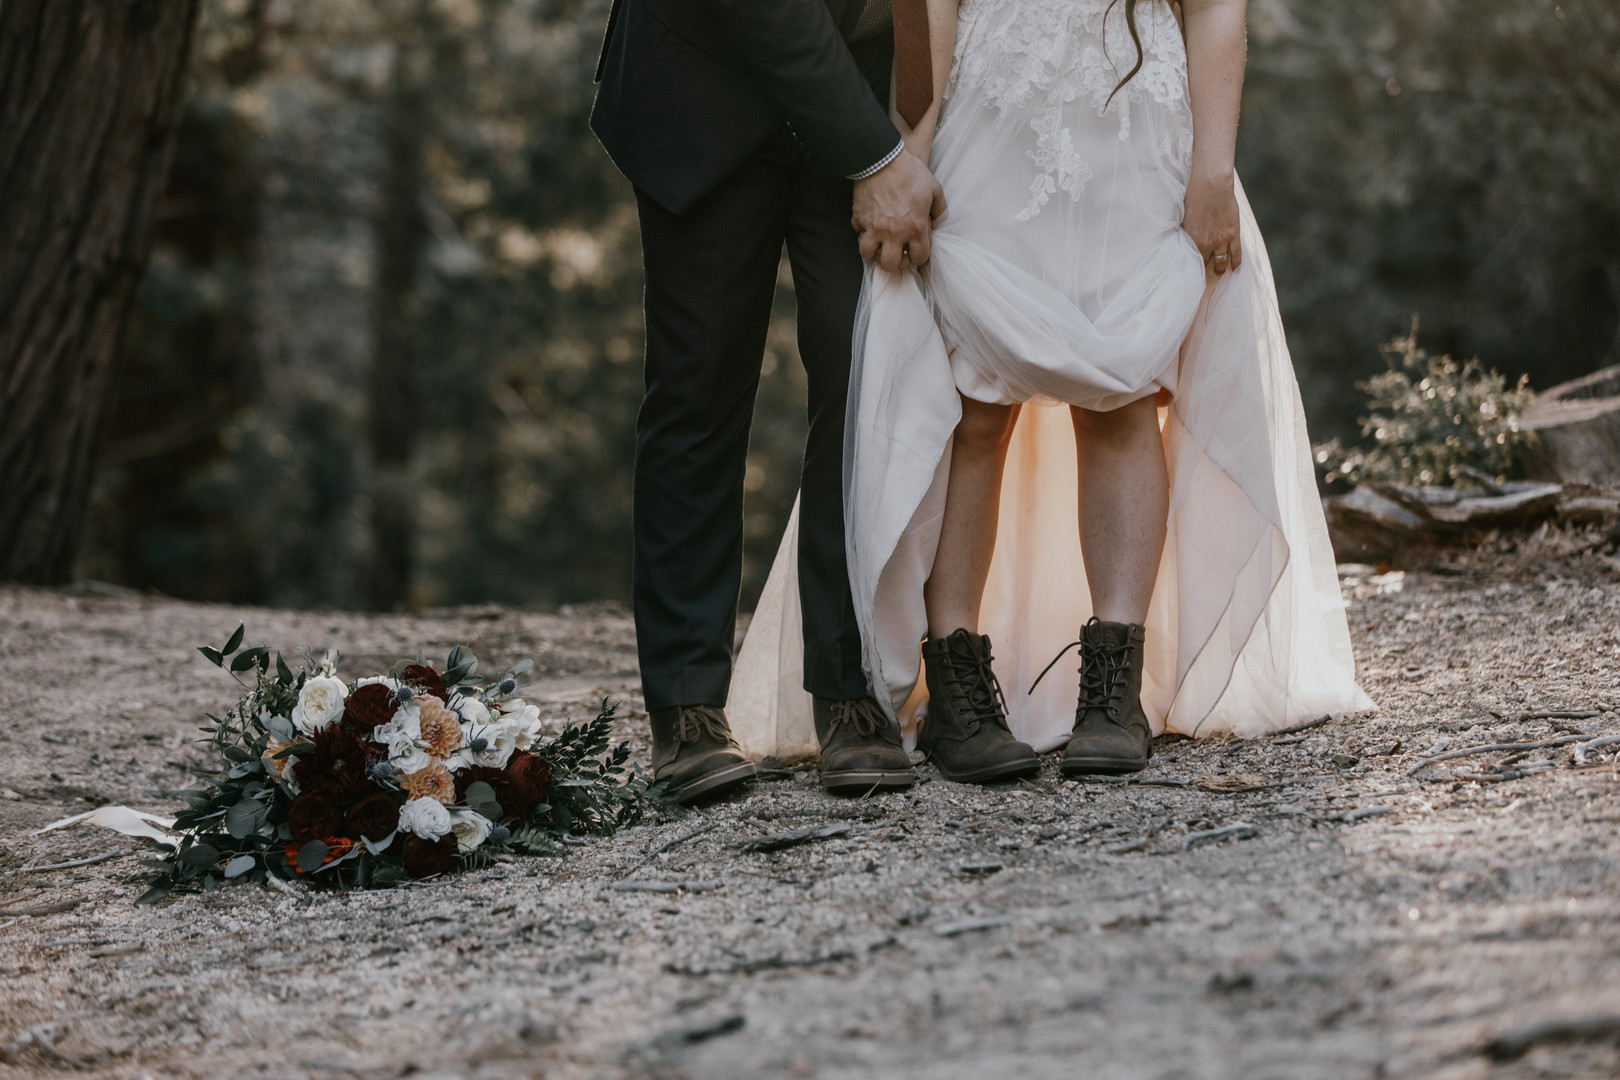 Hiking Boots Wedding Shoes | Intimate Rustic Forest Wedding